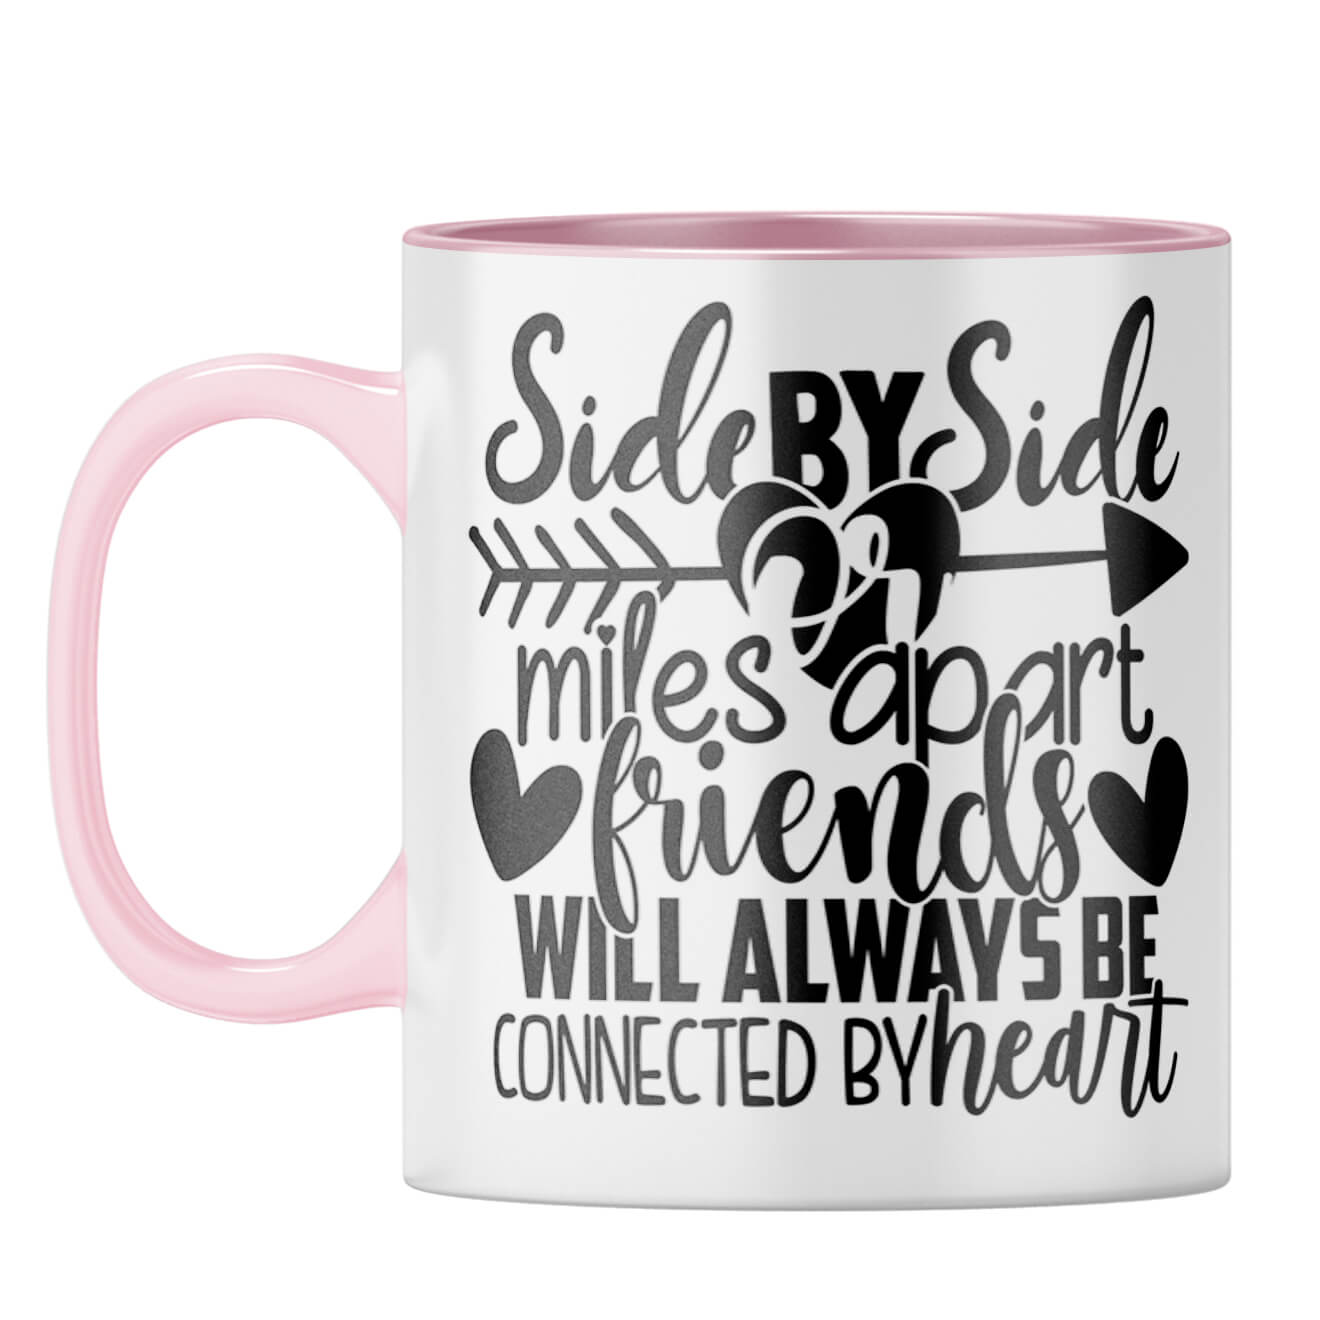 Friends Connected By Heart Coffee Mug Pink